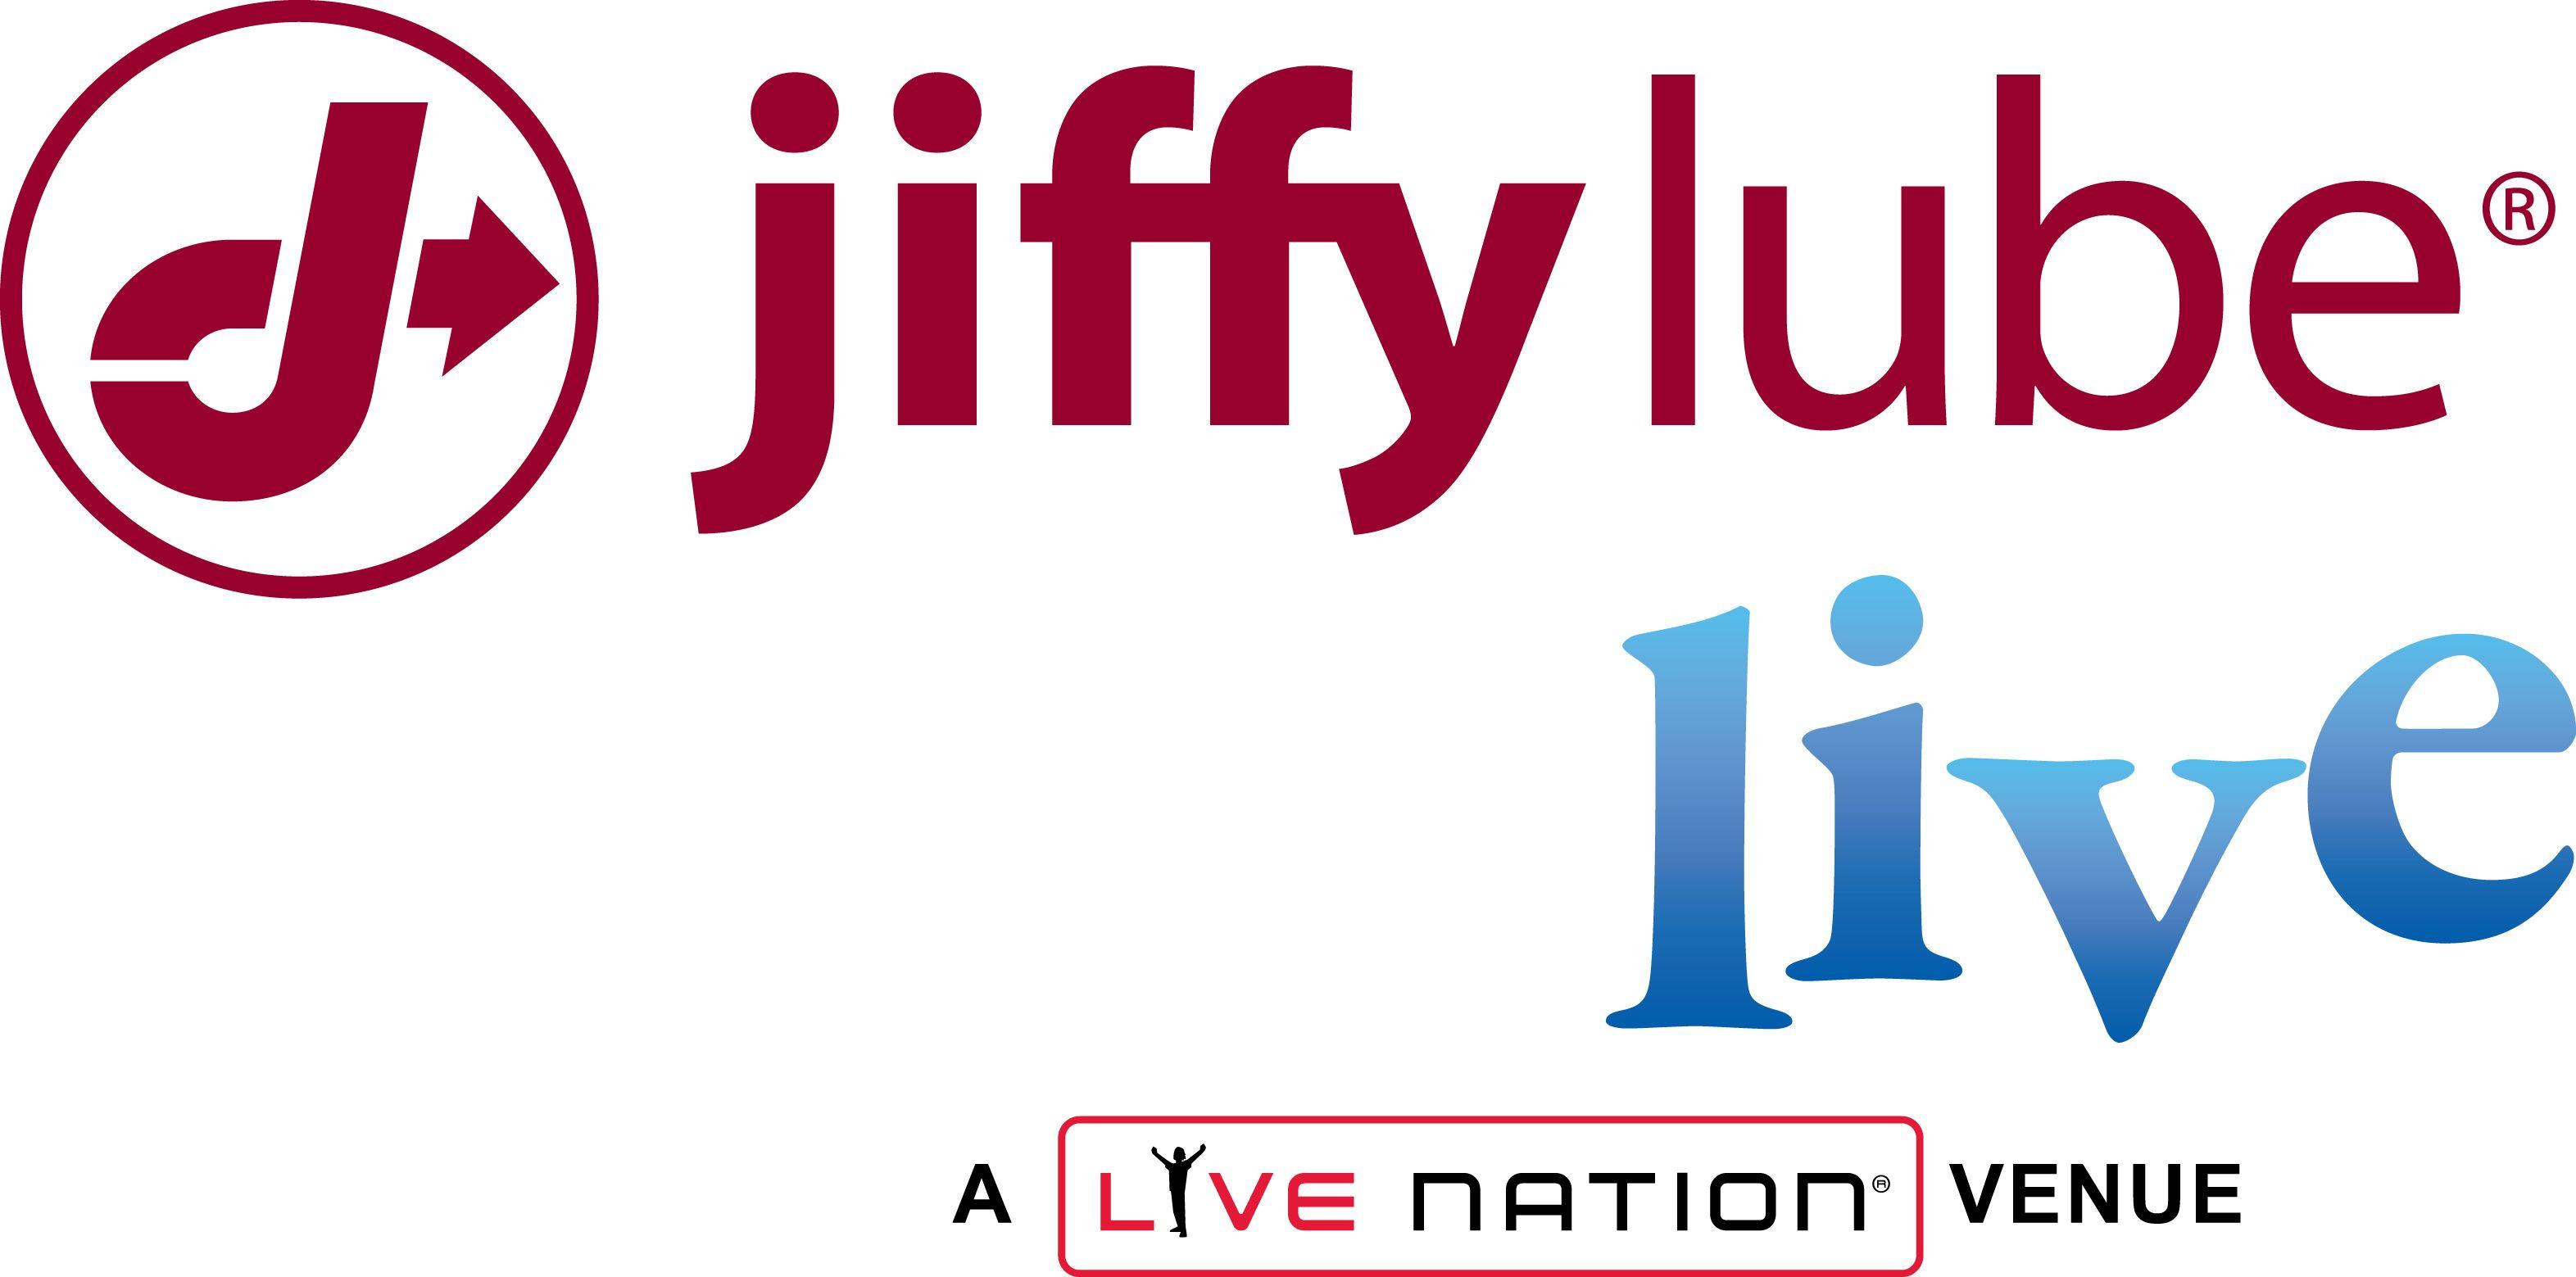 Jiffy Lube Logo - Oil Change & Vehicle Maintenance with expanded services - Maryland ...